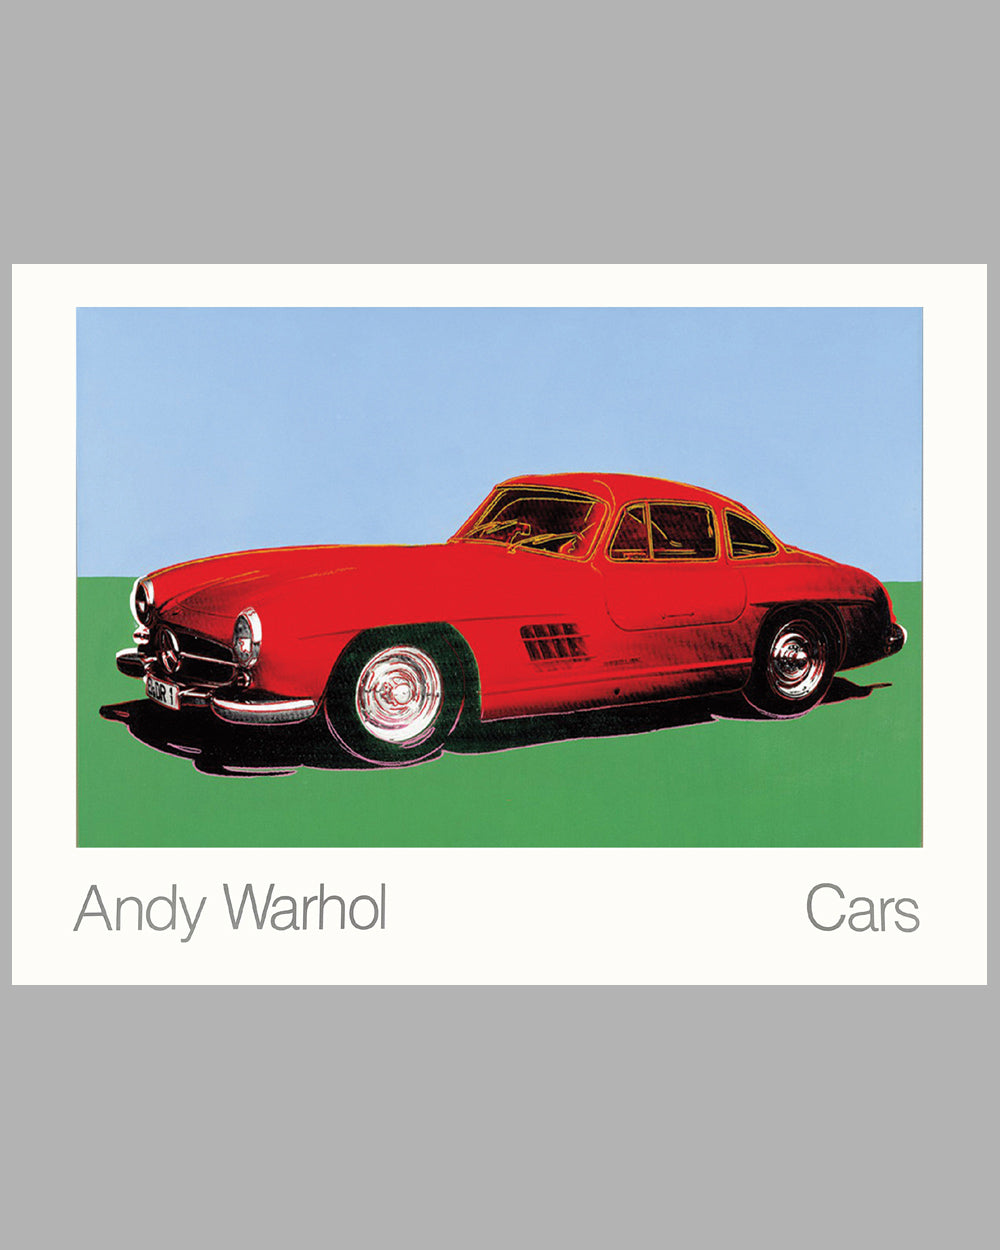 Mercedes 300 SL Gullwing large poster by Andy Warhol